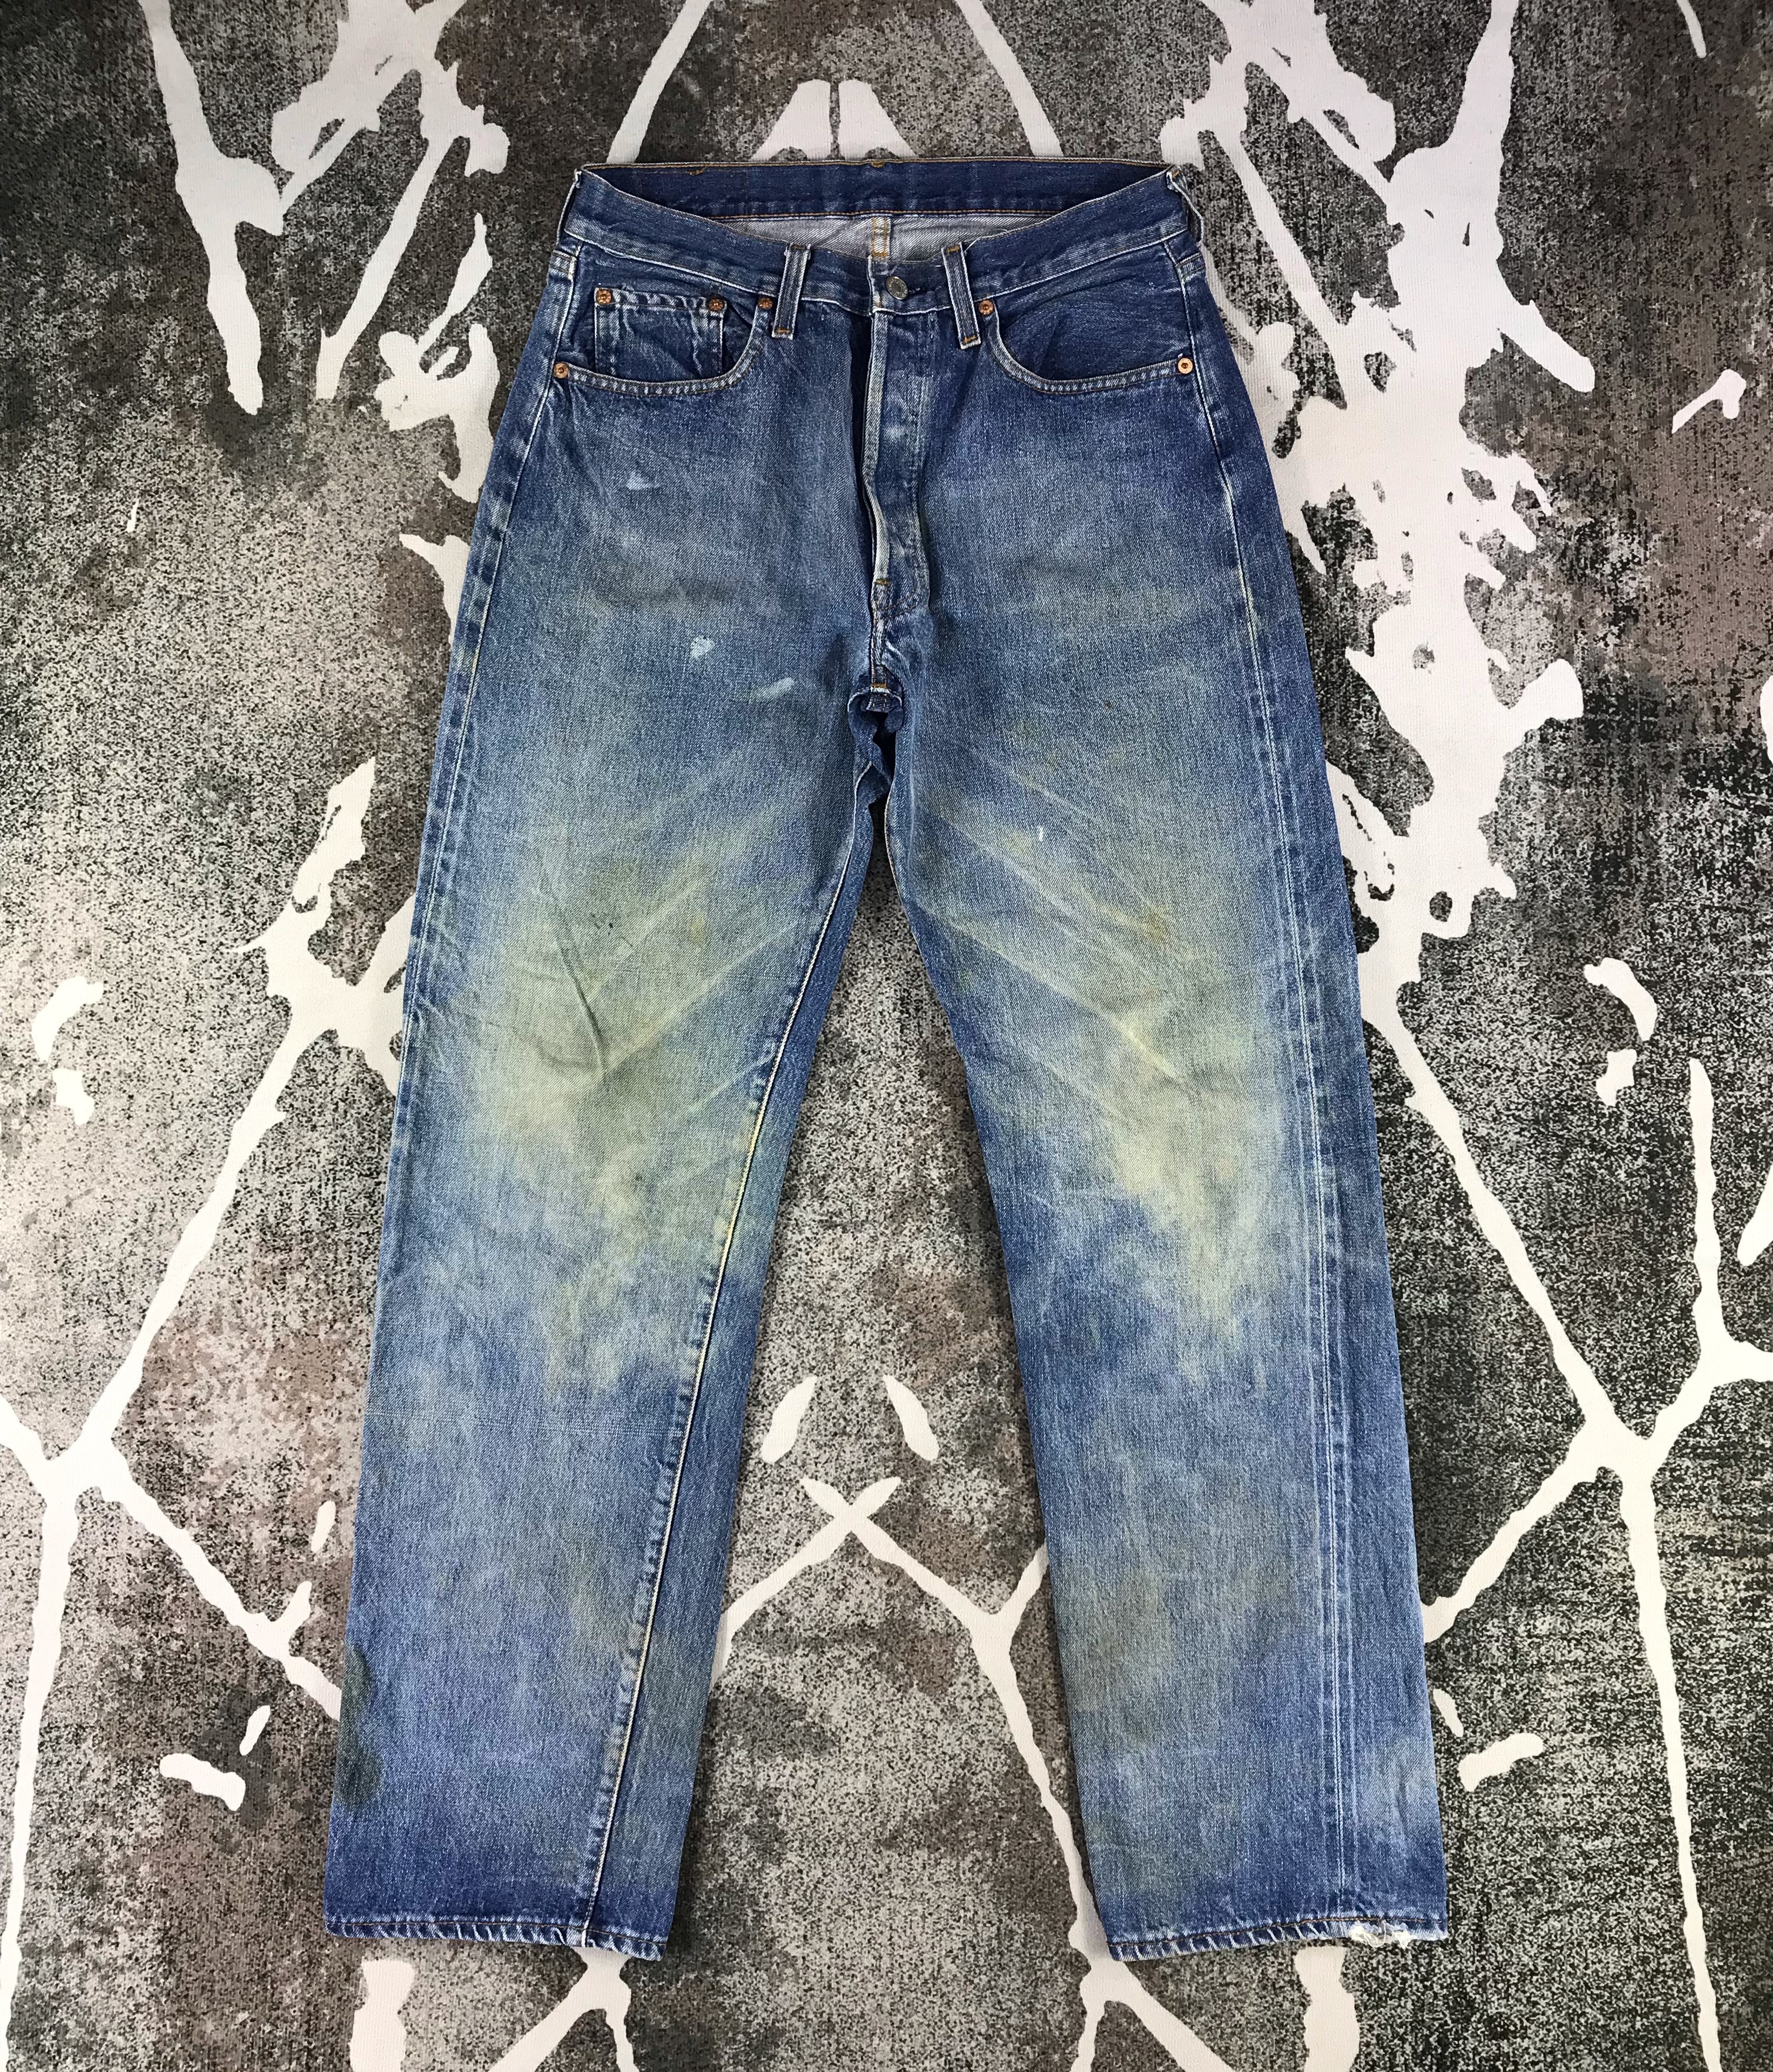 19th-century Levi's jeans found in mine shaft sell for more than $87,000